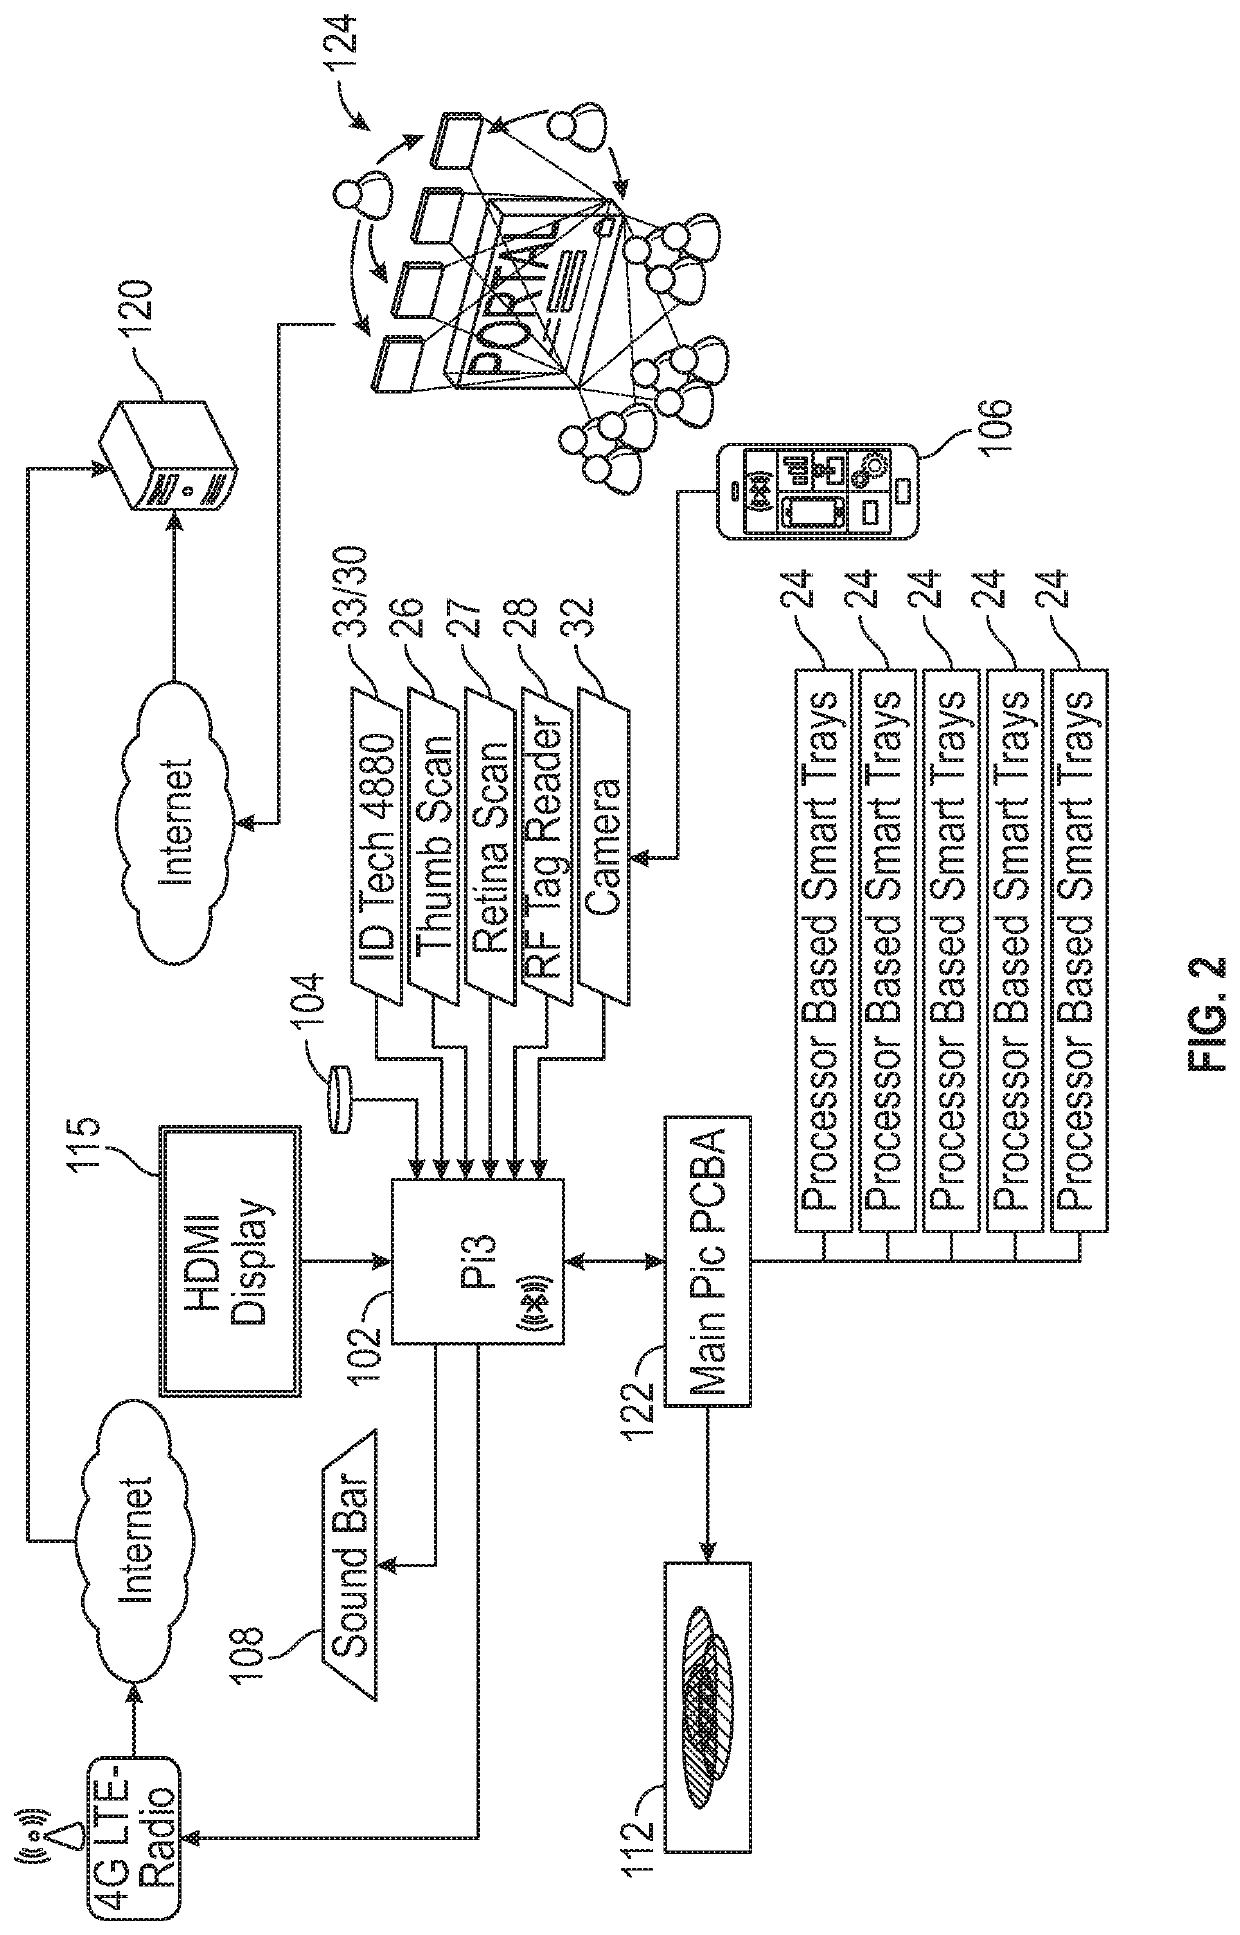 System and method of individualized merchandising in an automatic retail device